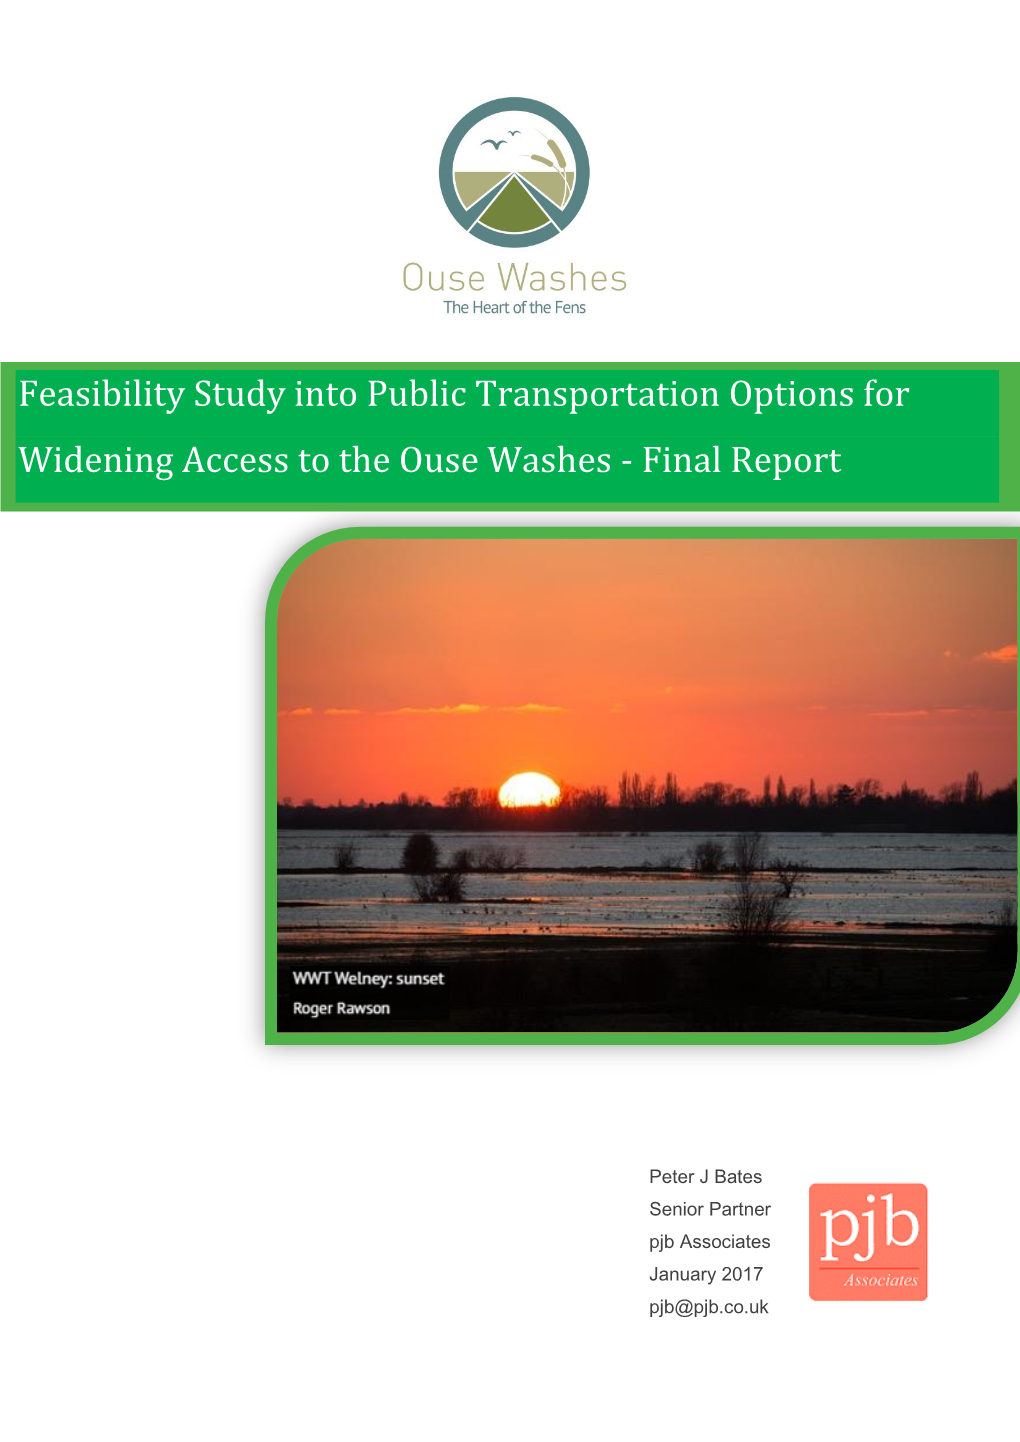 Feasibility Study Into Public Transportation Options for Widening Access to the Ouse Washes - Final Report